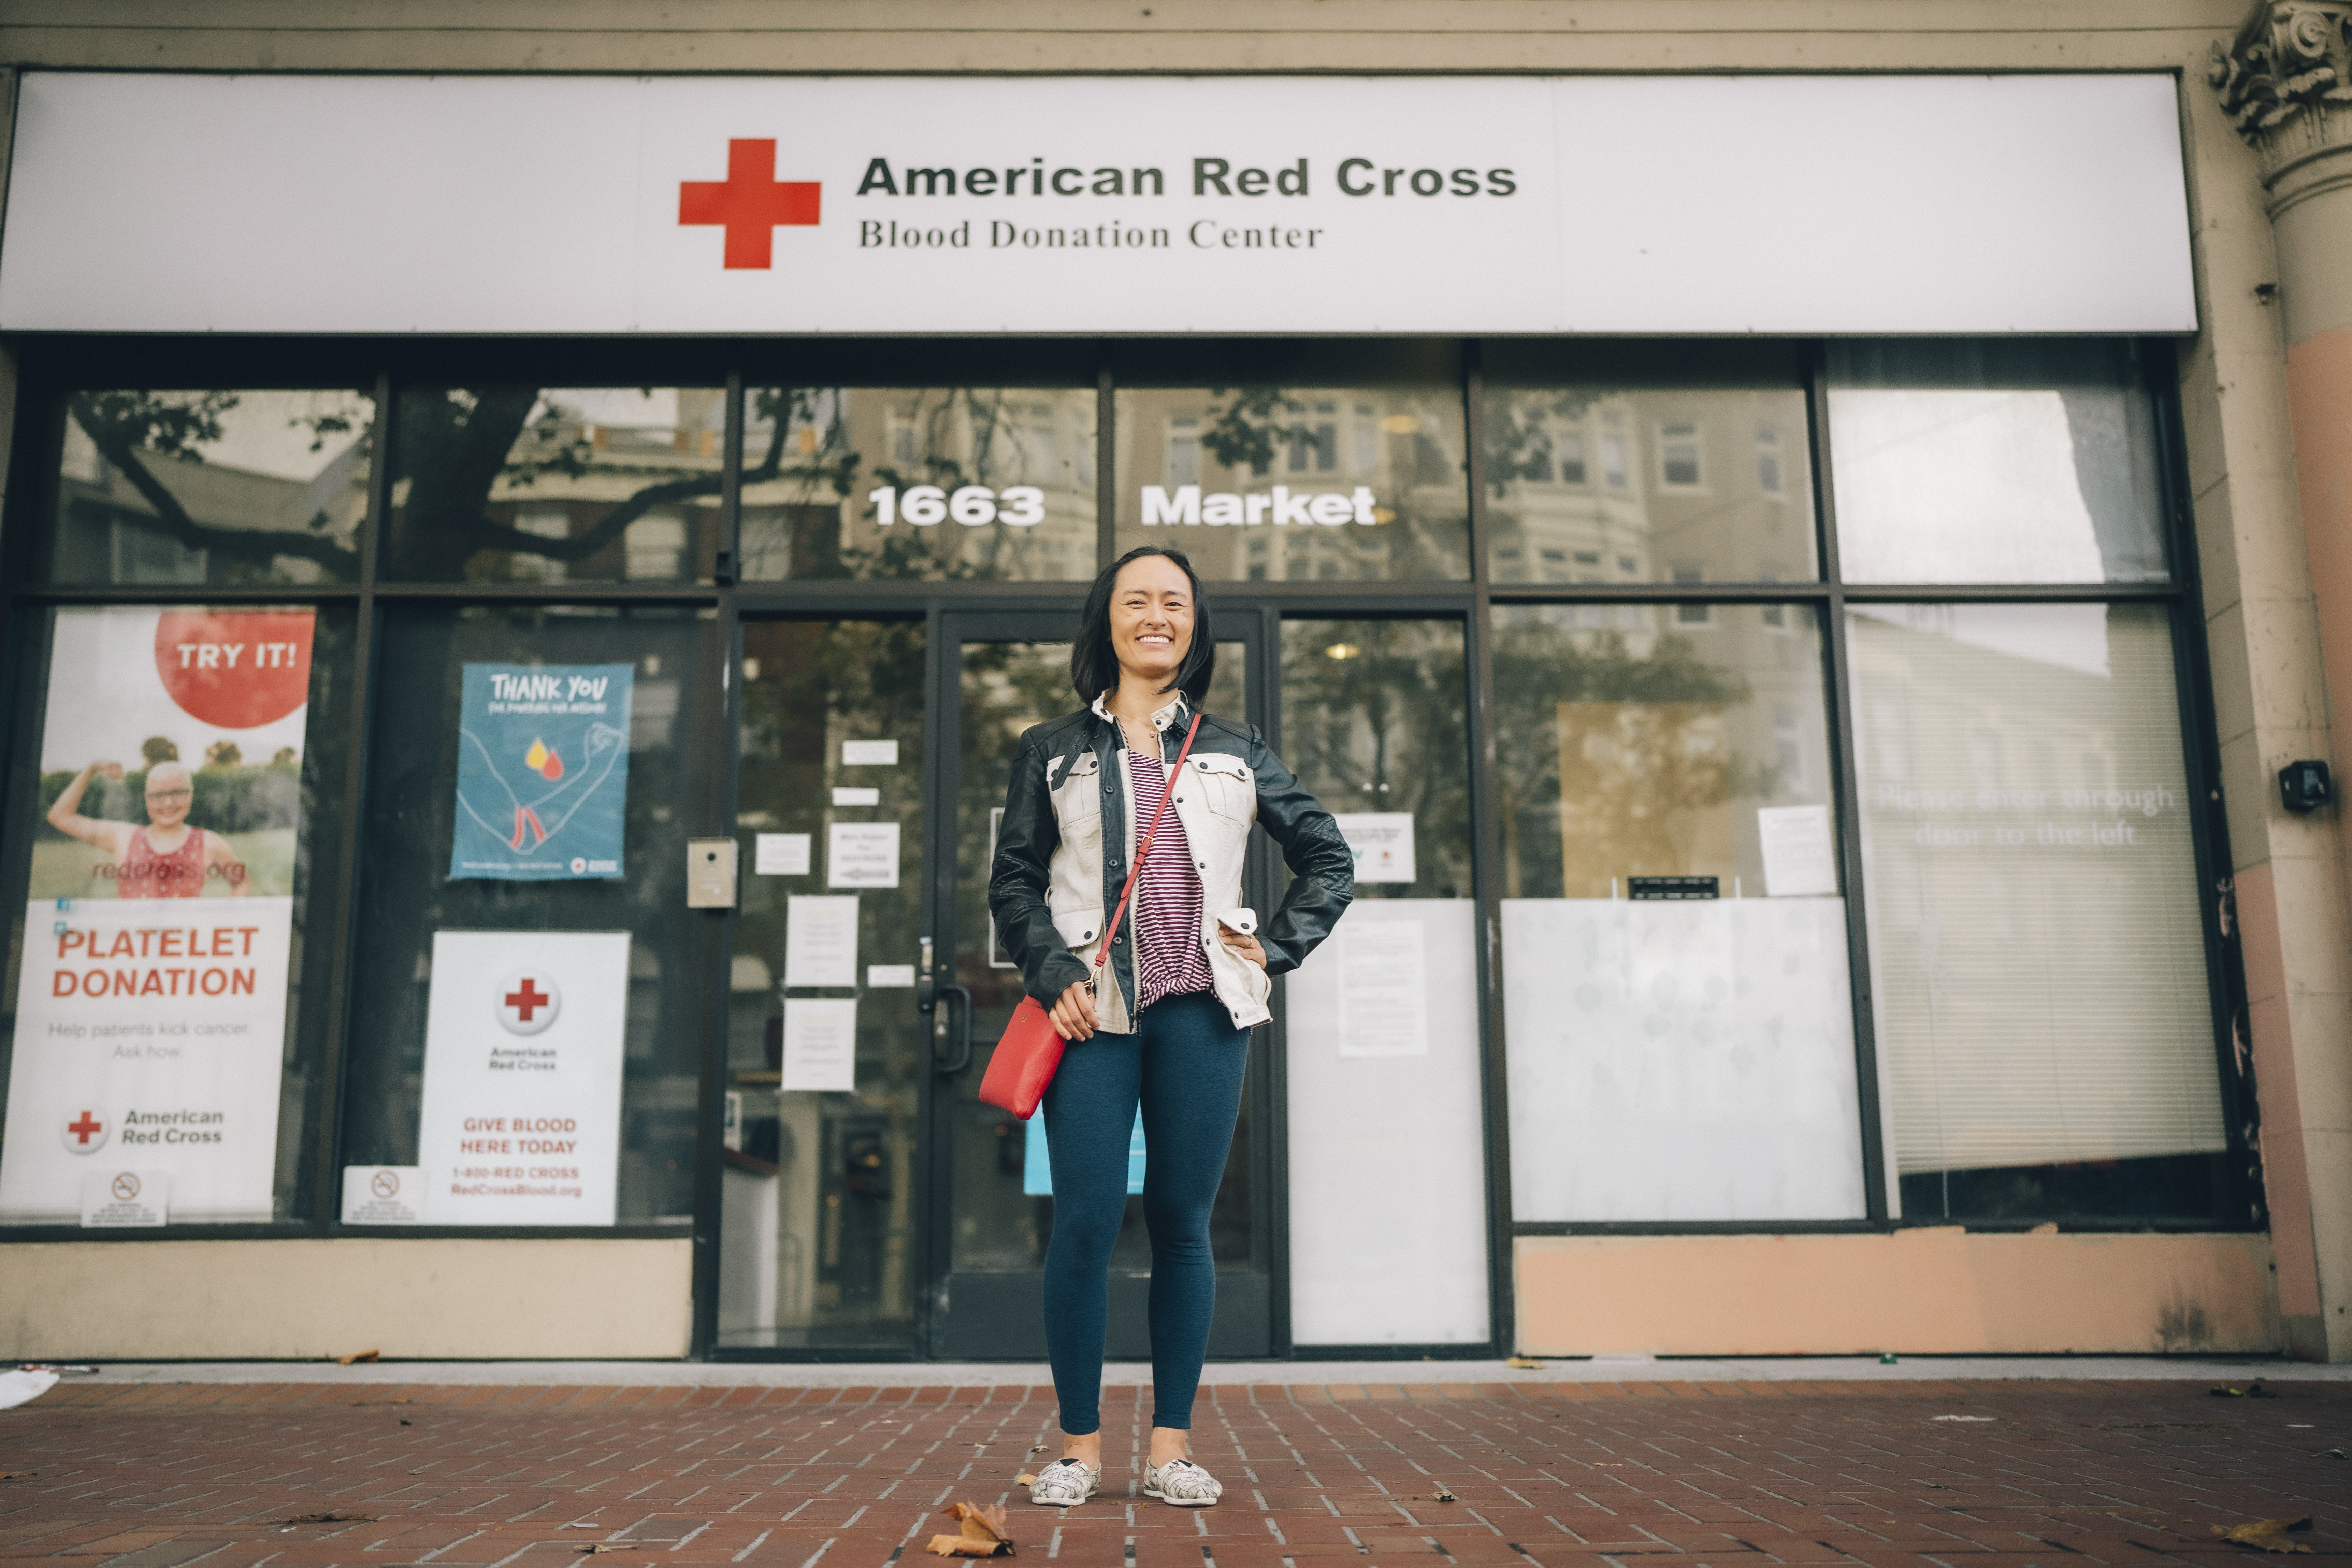 Julie standing in front of the doors to the American Red Cross Blood Donation Center